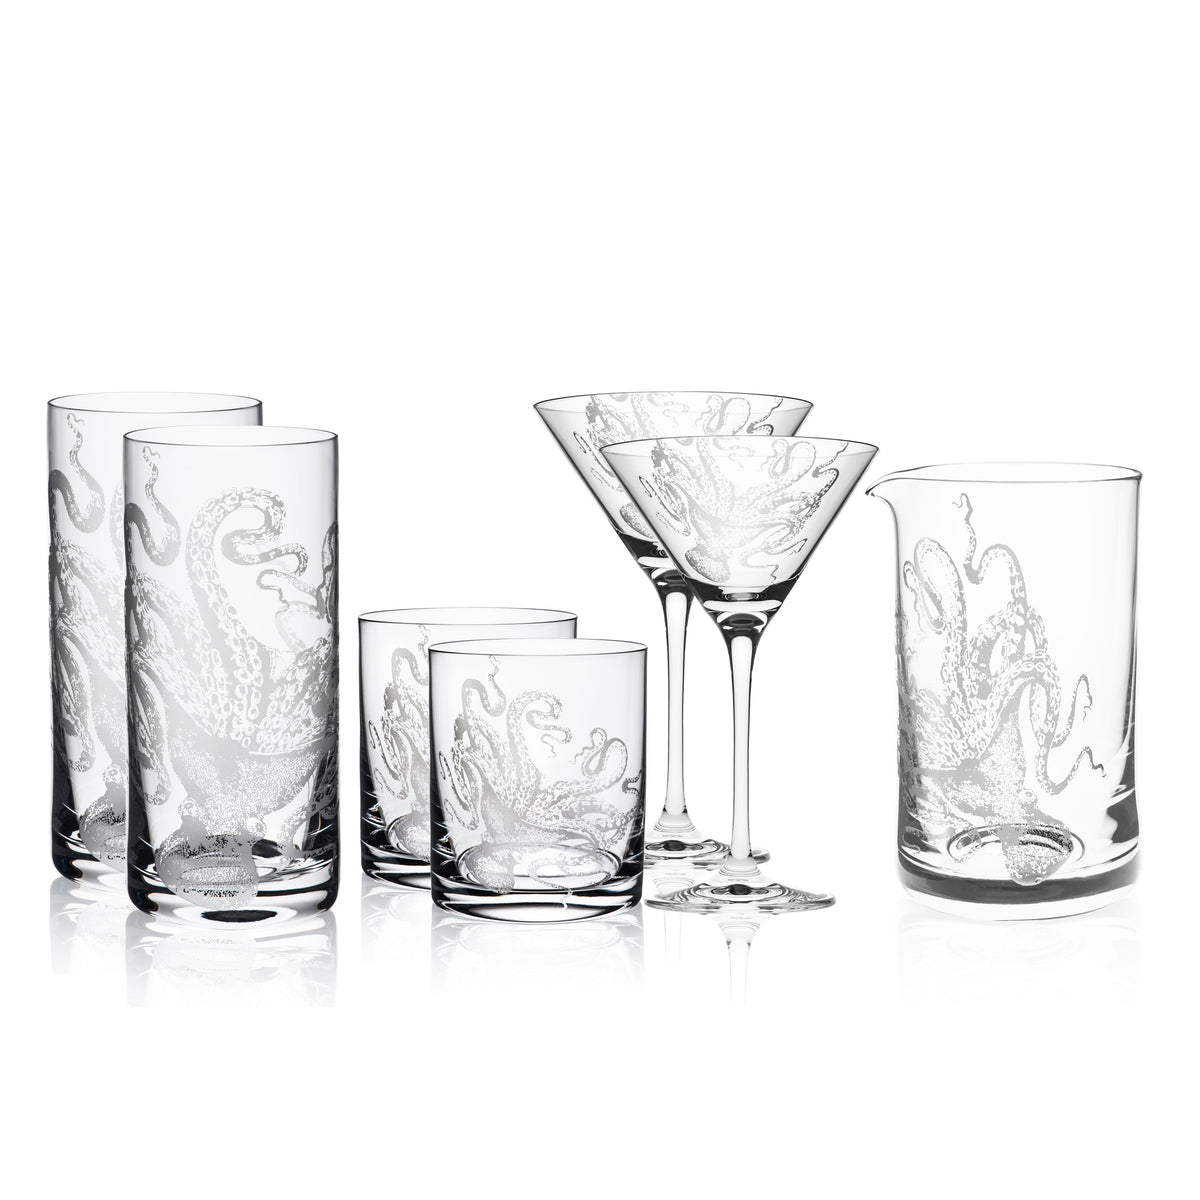 Handcrafted Lucy Short Drink Glasses with an octopus design from Caskata Artisanal Home.